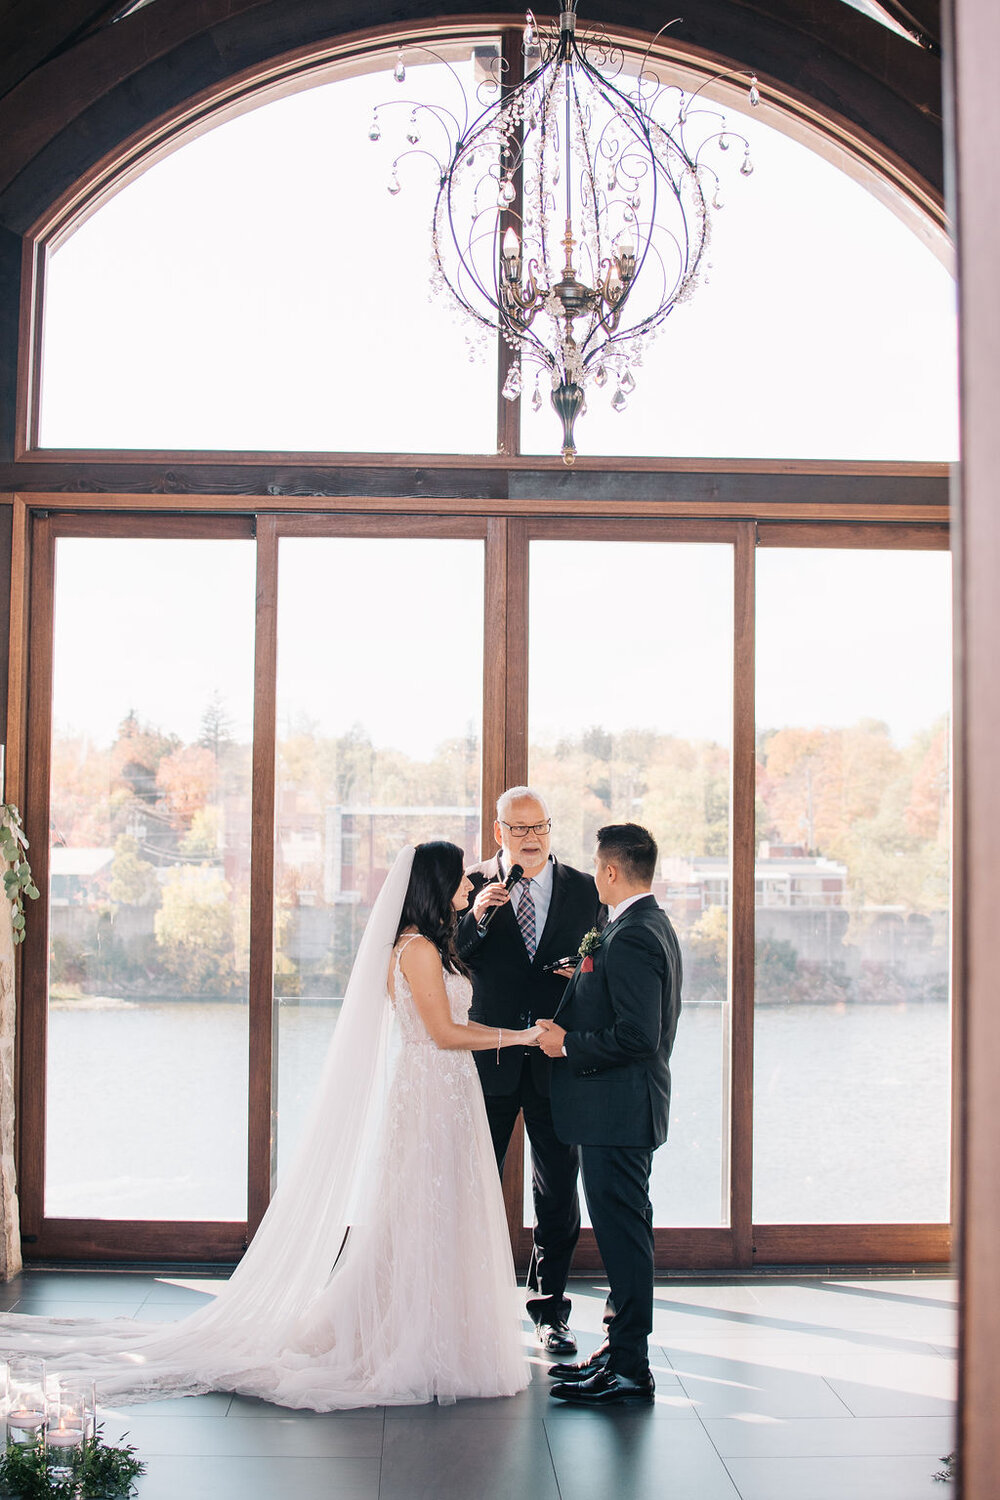 Bride and groom's timeless fall wedding day at Cambridge Mill photographed by Toronto wedding photographers, Ugo Photography